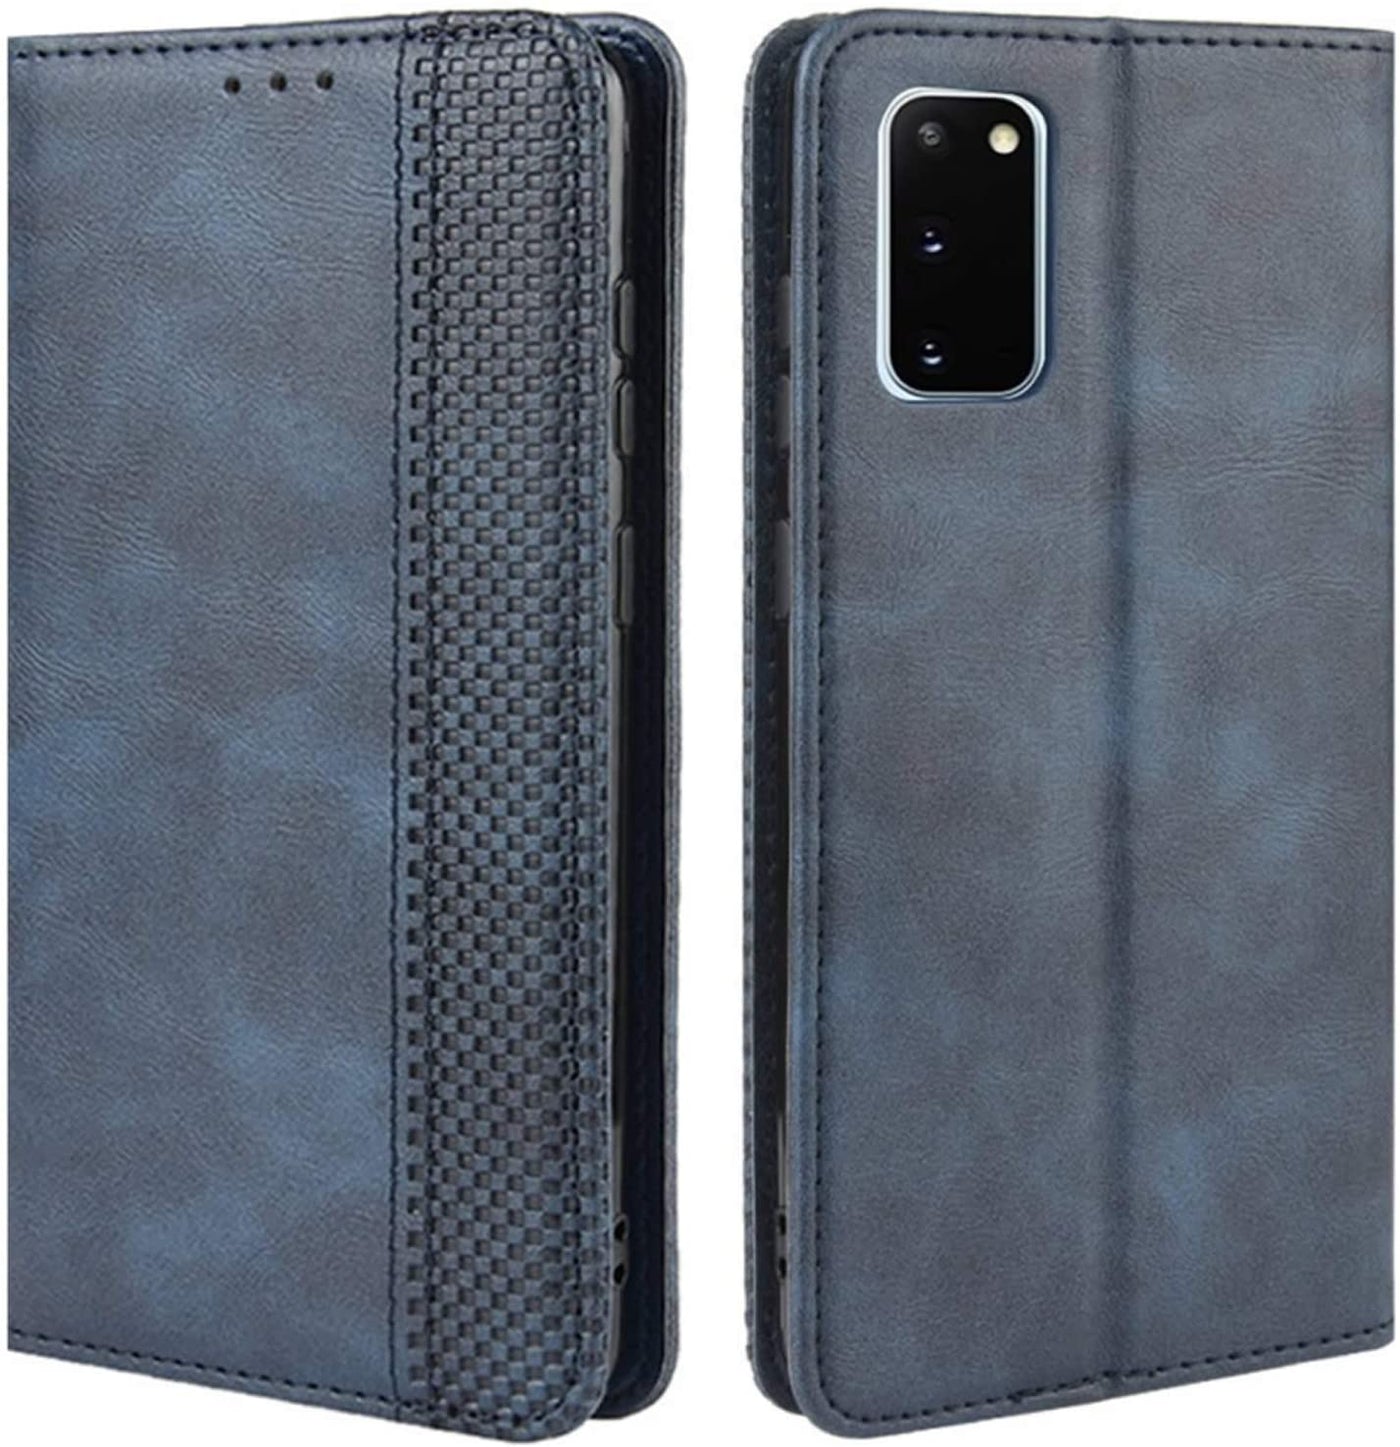 Samsung Galaxy S20 FE blue color leather wallet flip cover case By excelsior